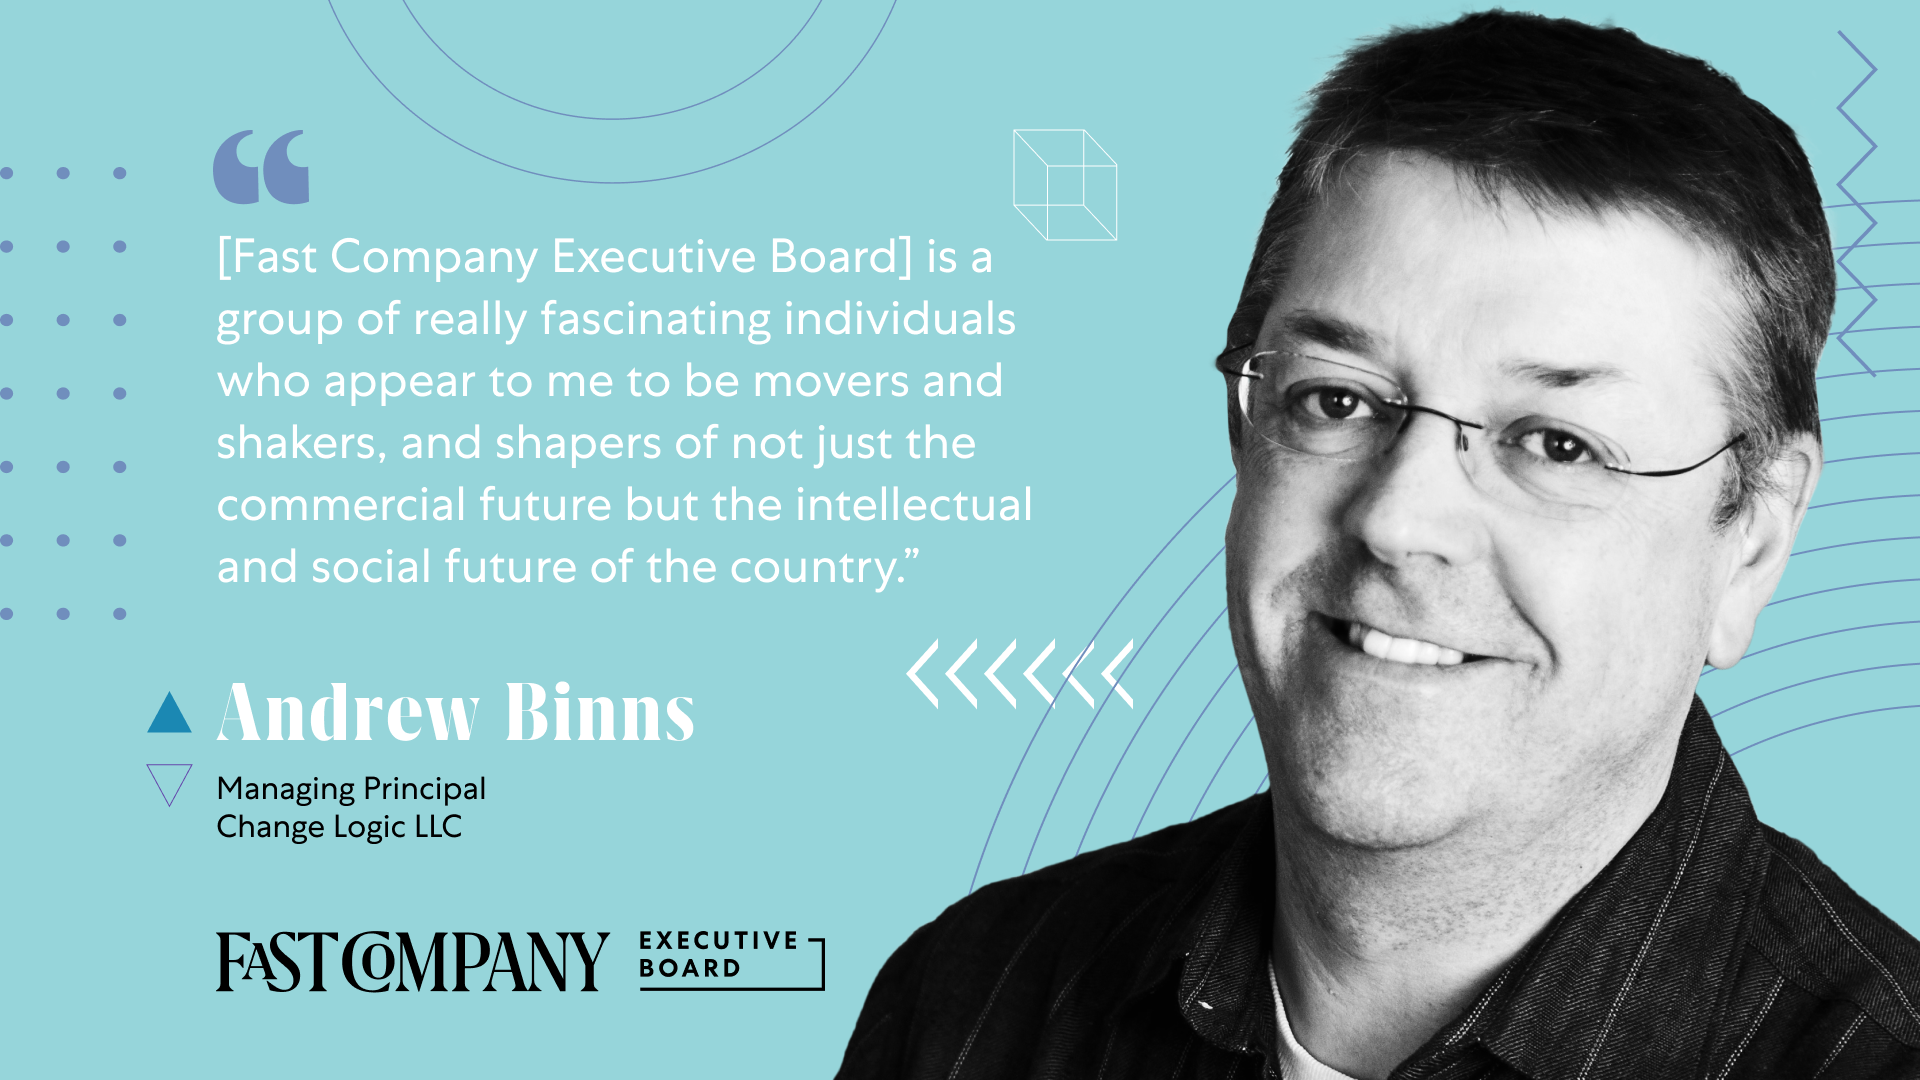 For Andrew Binns, Fast Company Executive Board is a Valuable Community of Movers and Shakers